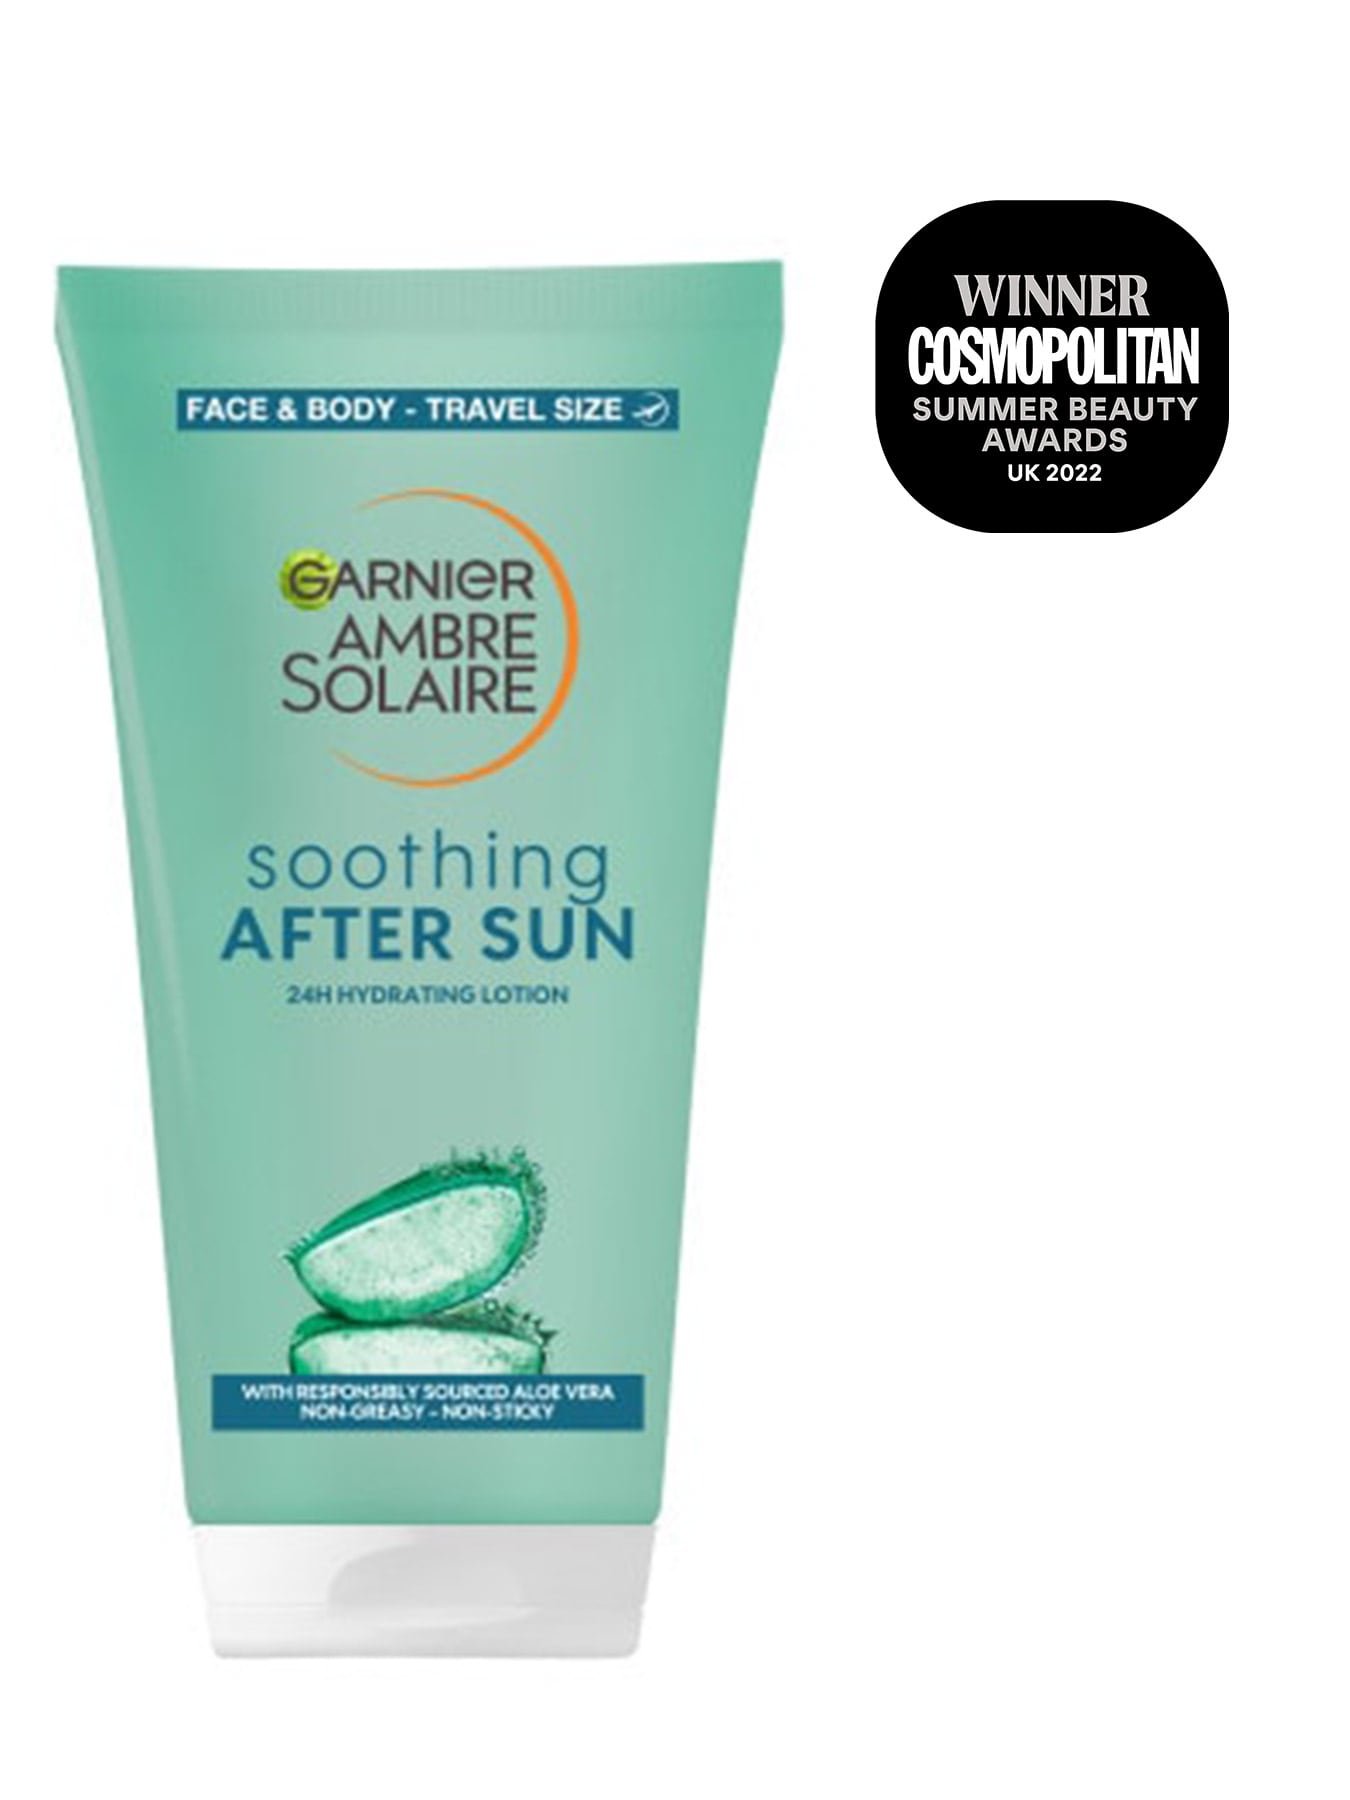 Smoothing aftersun lotion with award